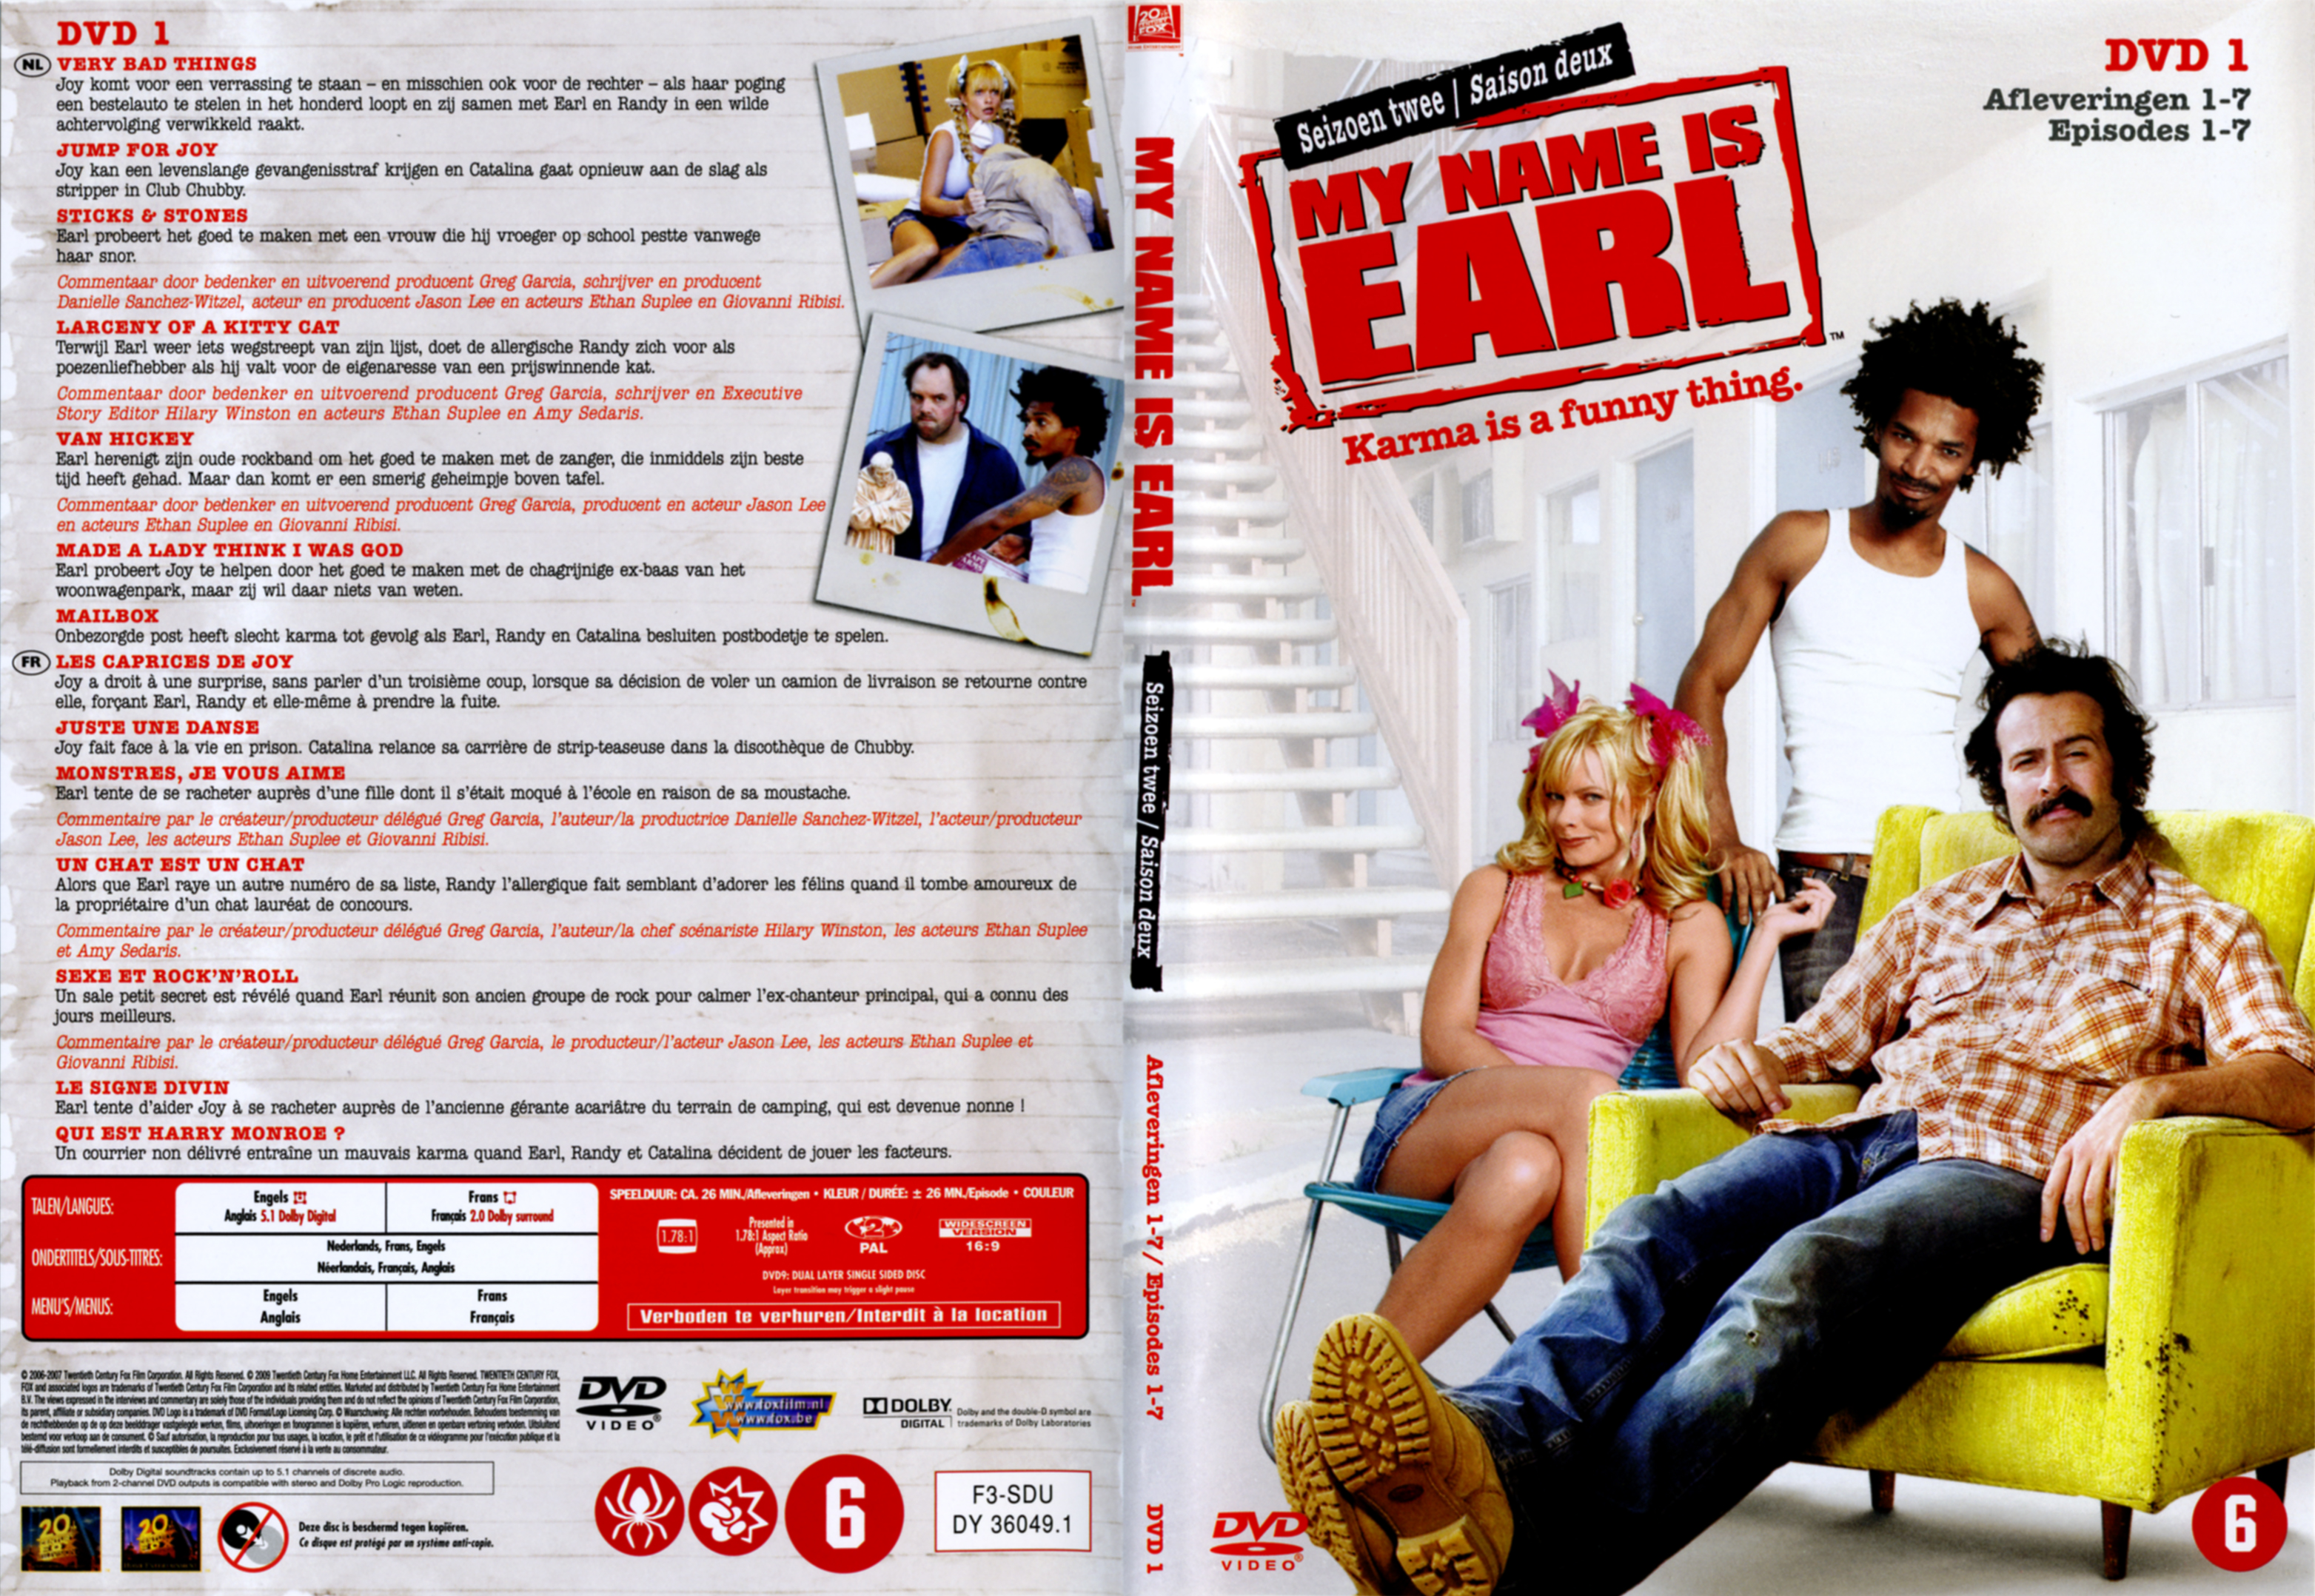 Jaquette DVD My name is Earl Saison 2 DVD 1